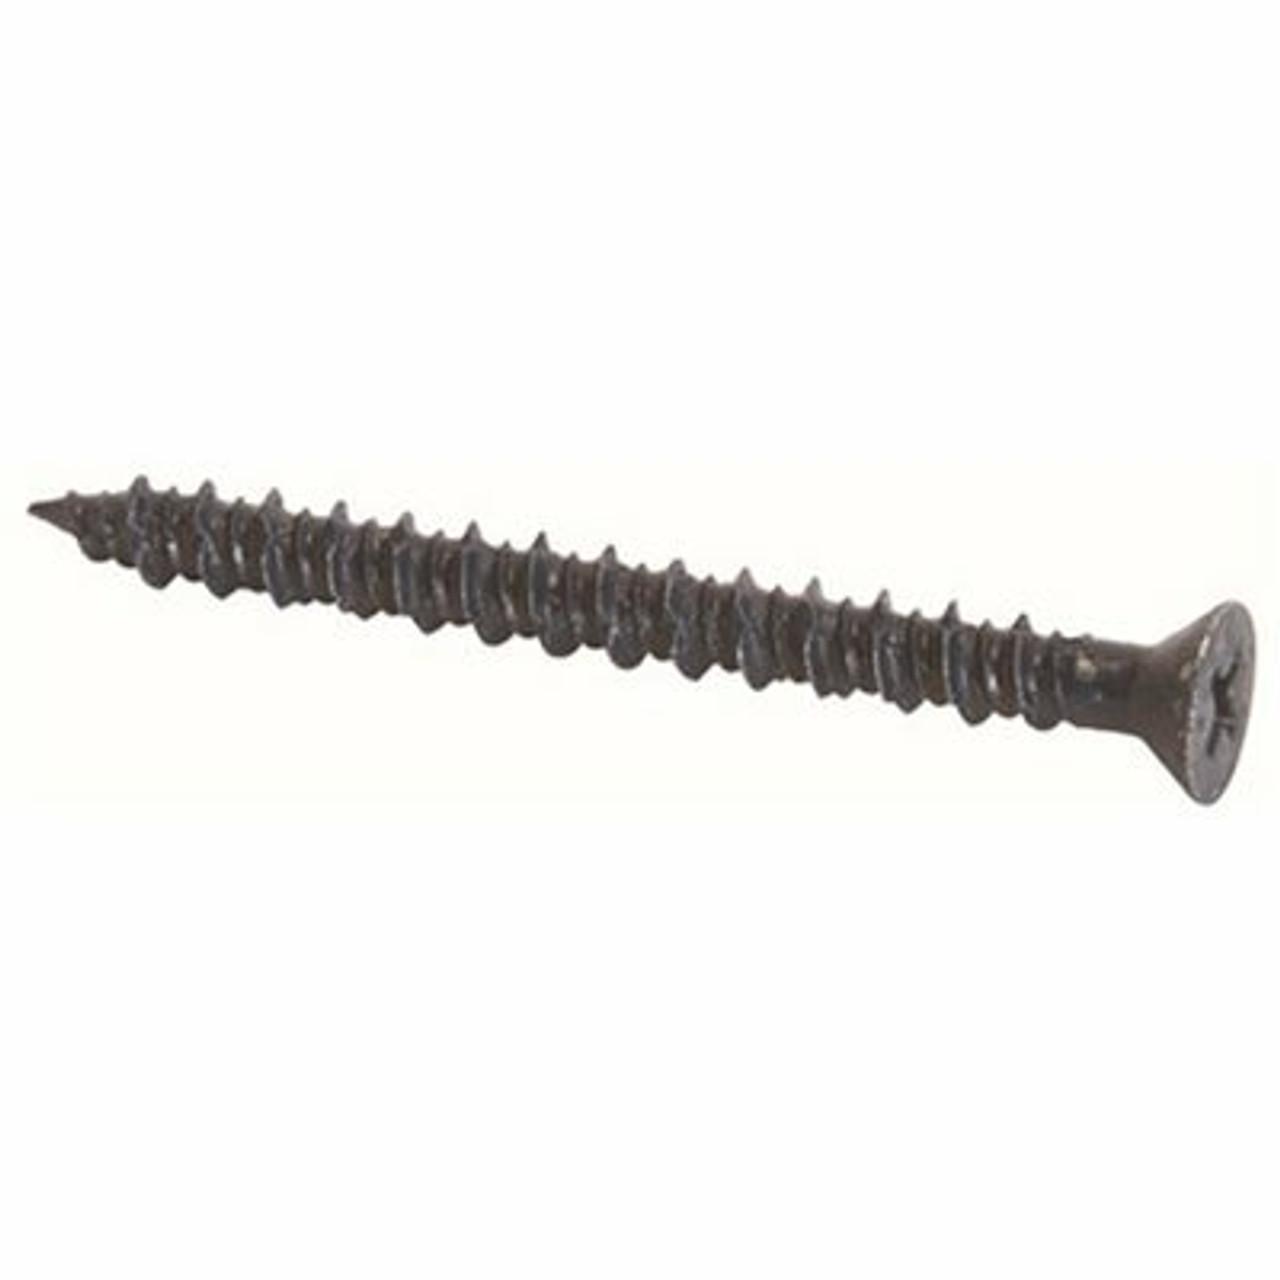 Lindstrom 3/16 In. X 2-1/4 In. Phillips Flat Head Masonry Fasteners (100 Per Pack)